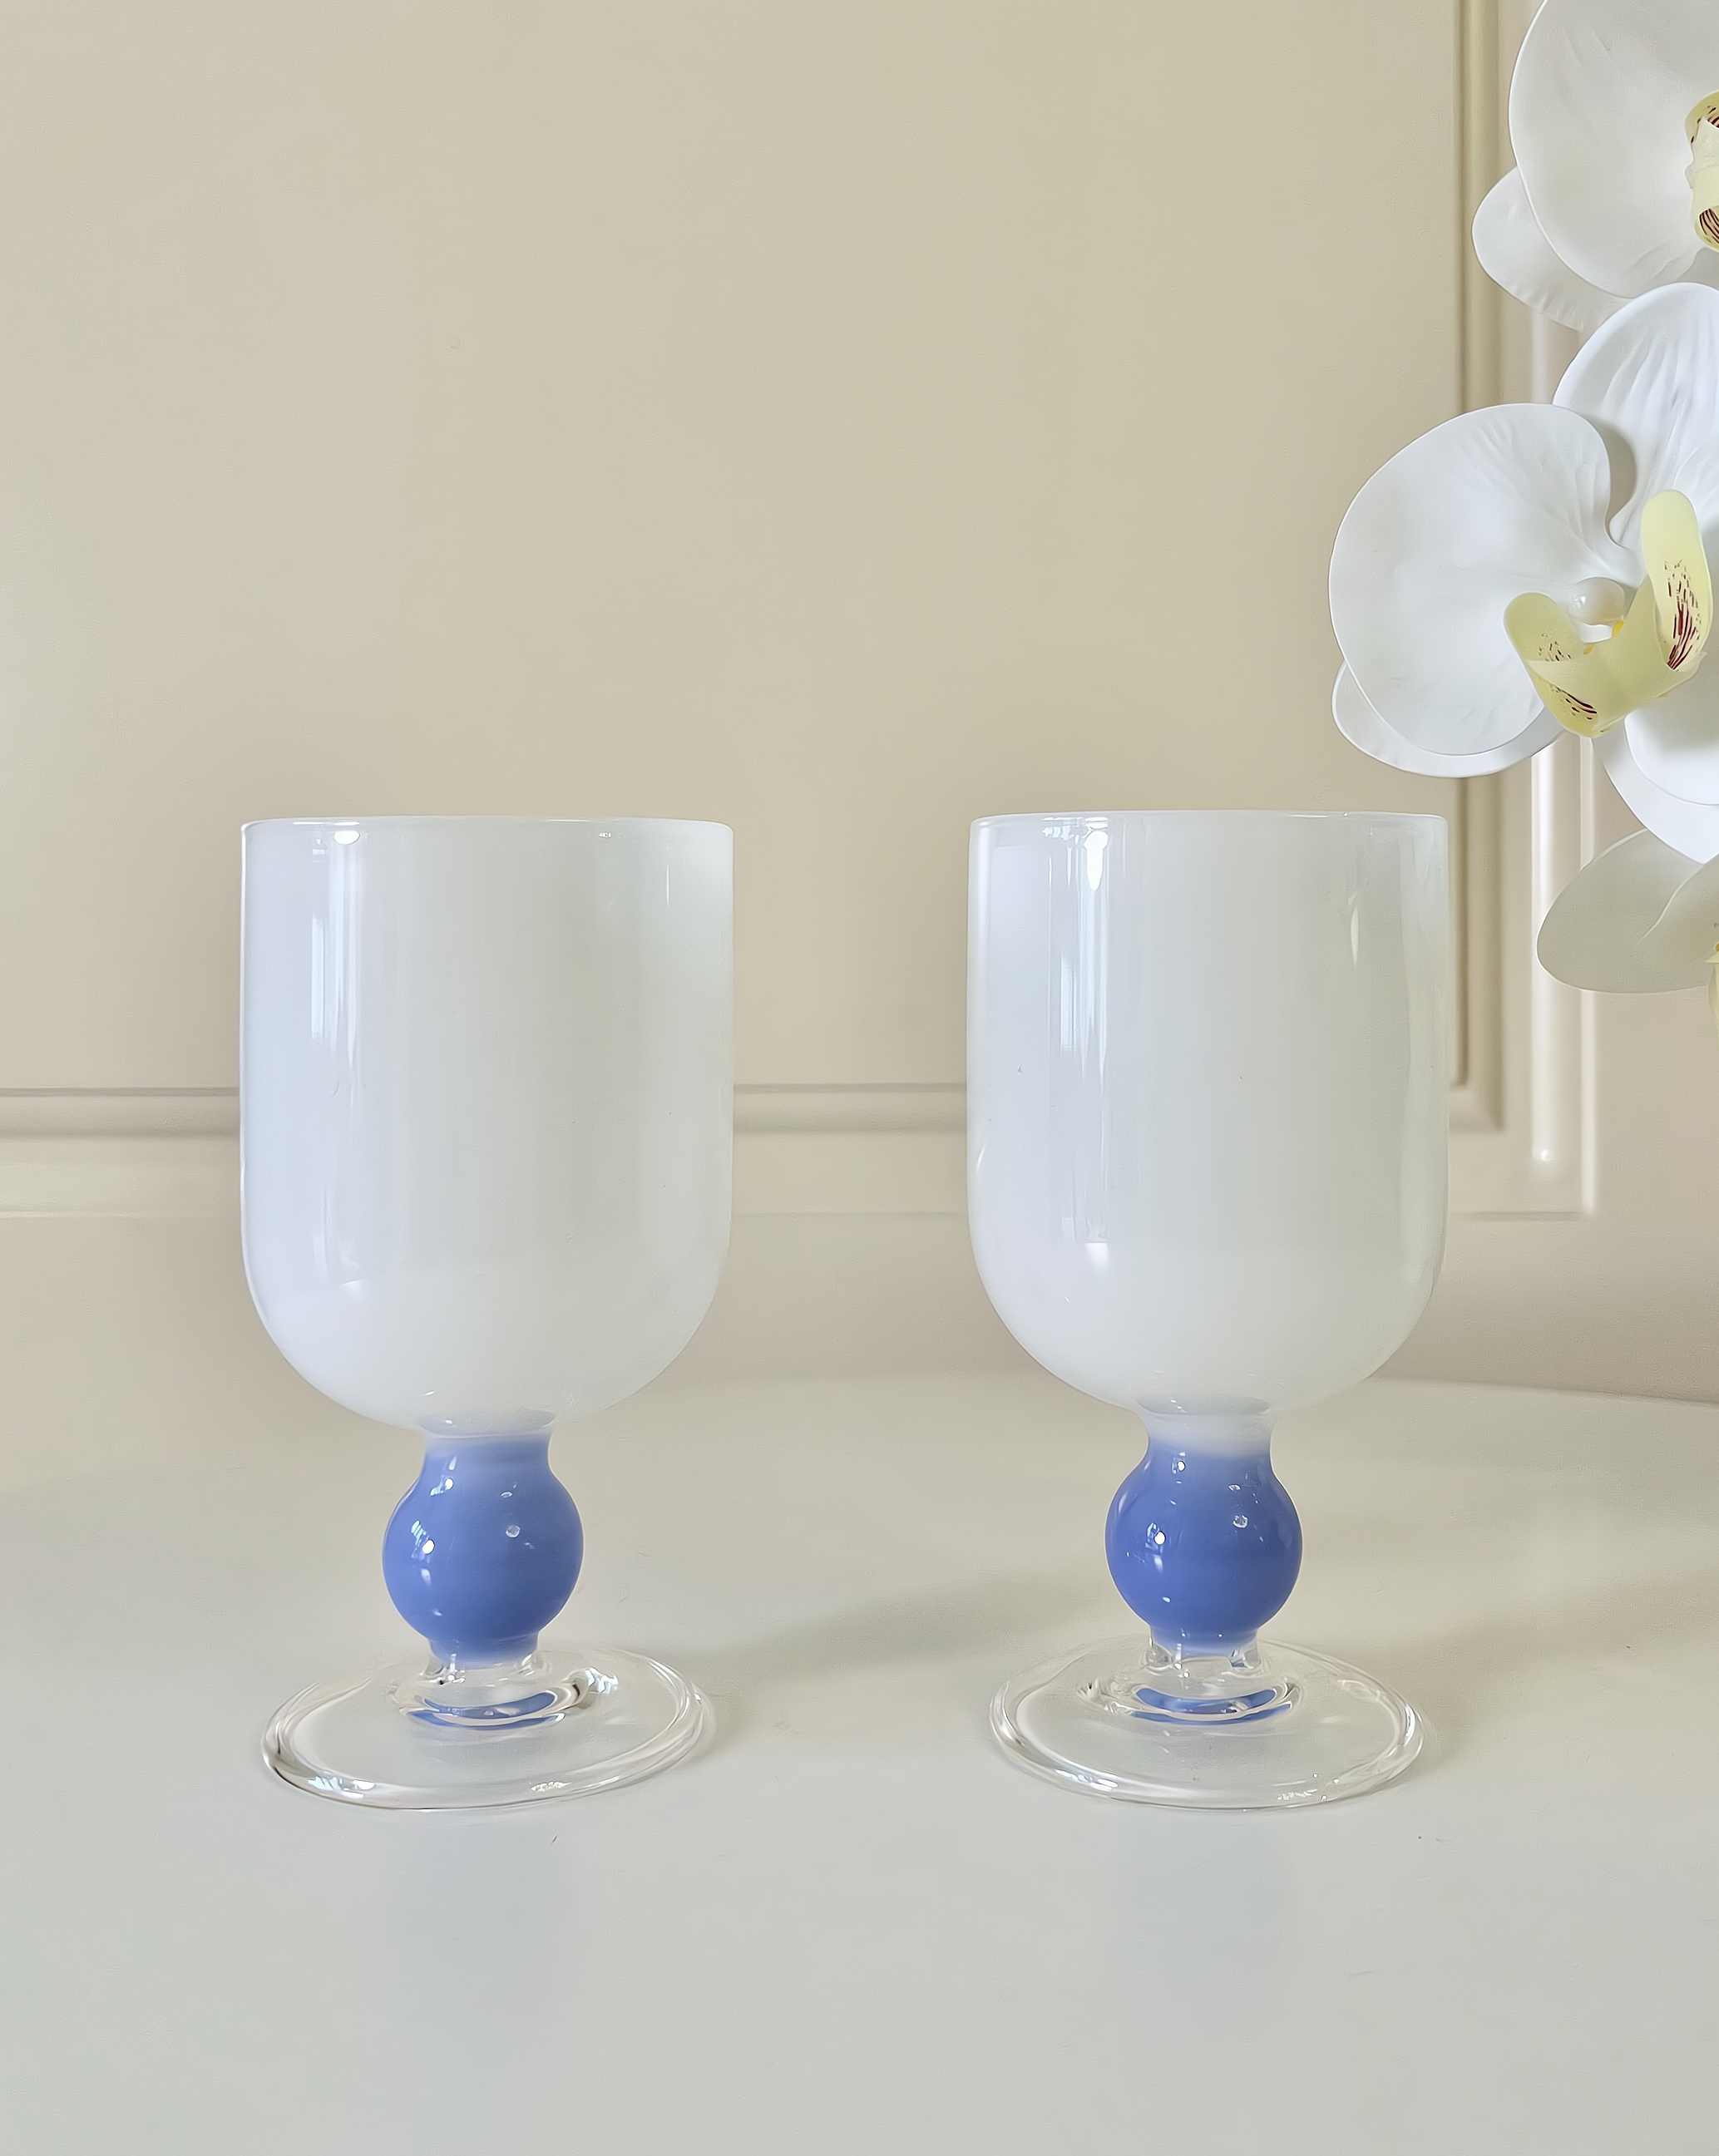 Creamy Jawbreaker Candy Wine Glasses Set of 2 ( $21.9 Each ) - Creamy Jawbreaker Candy Wine Glasses Set - Blueberry - INSPECIAL HOME